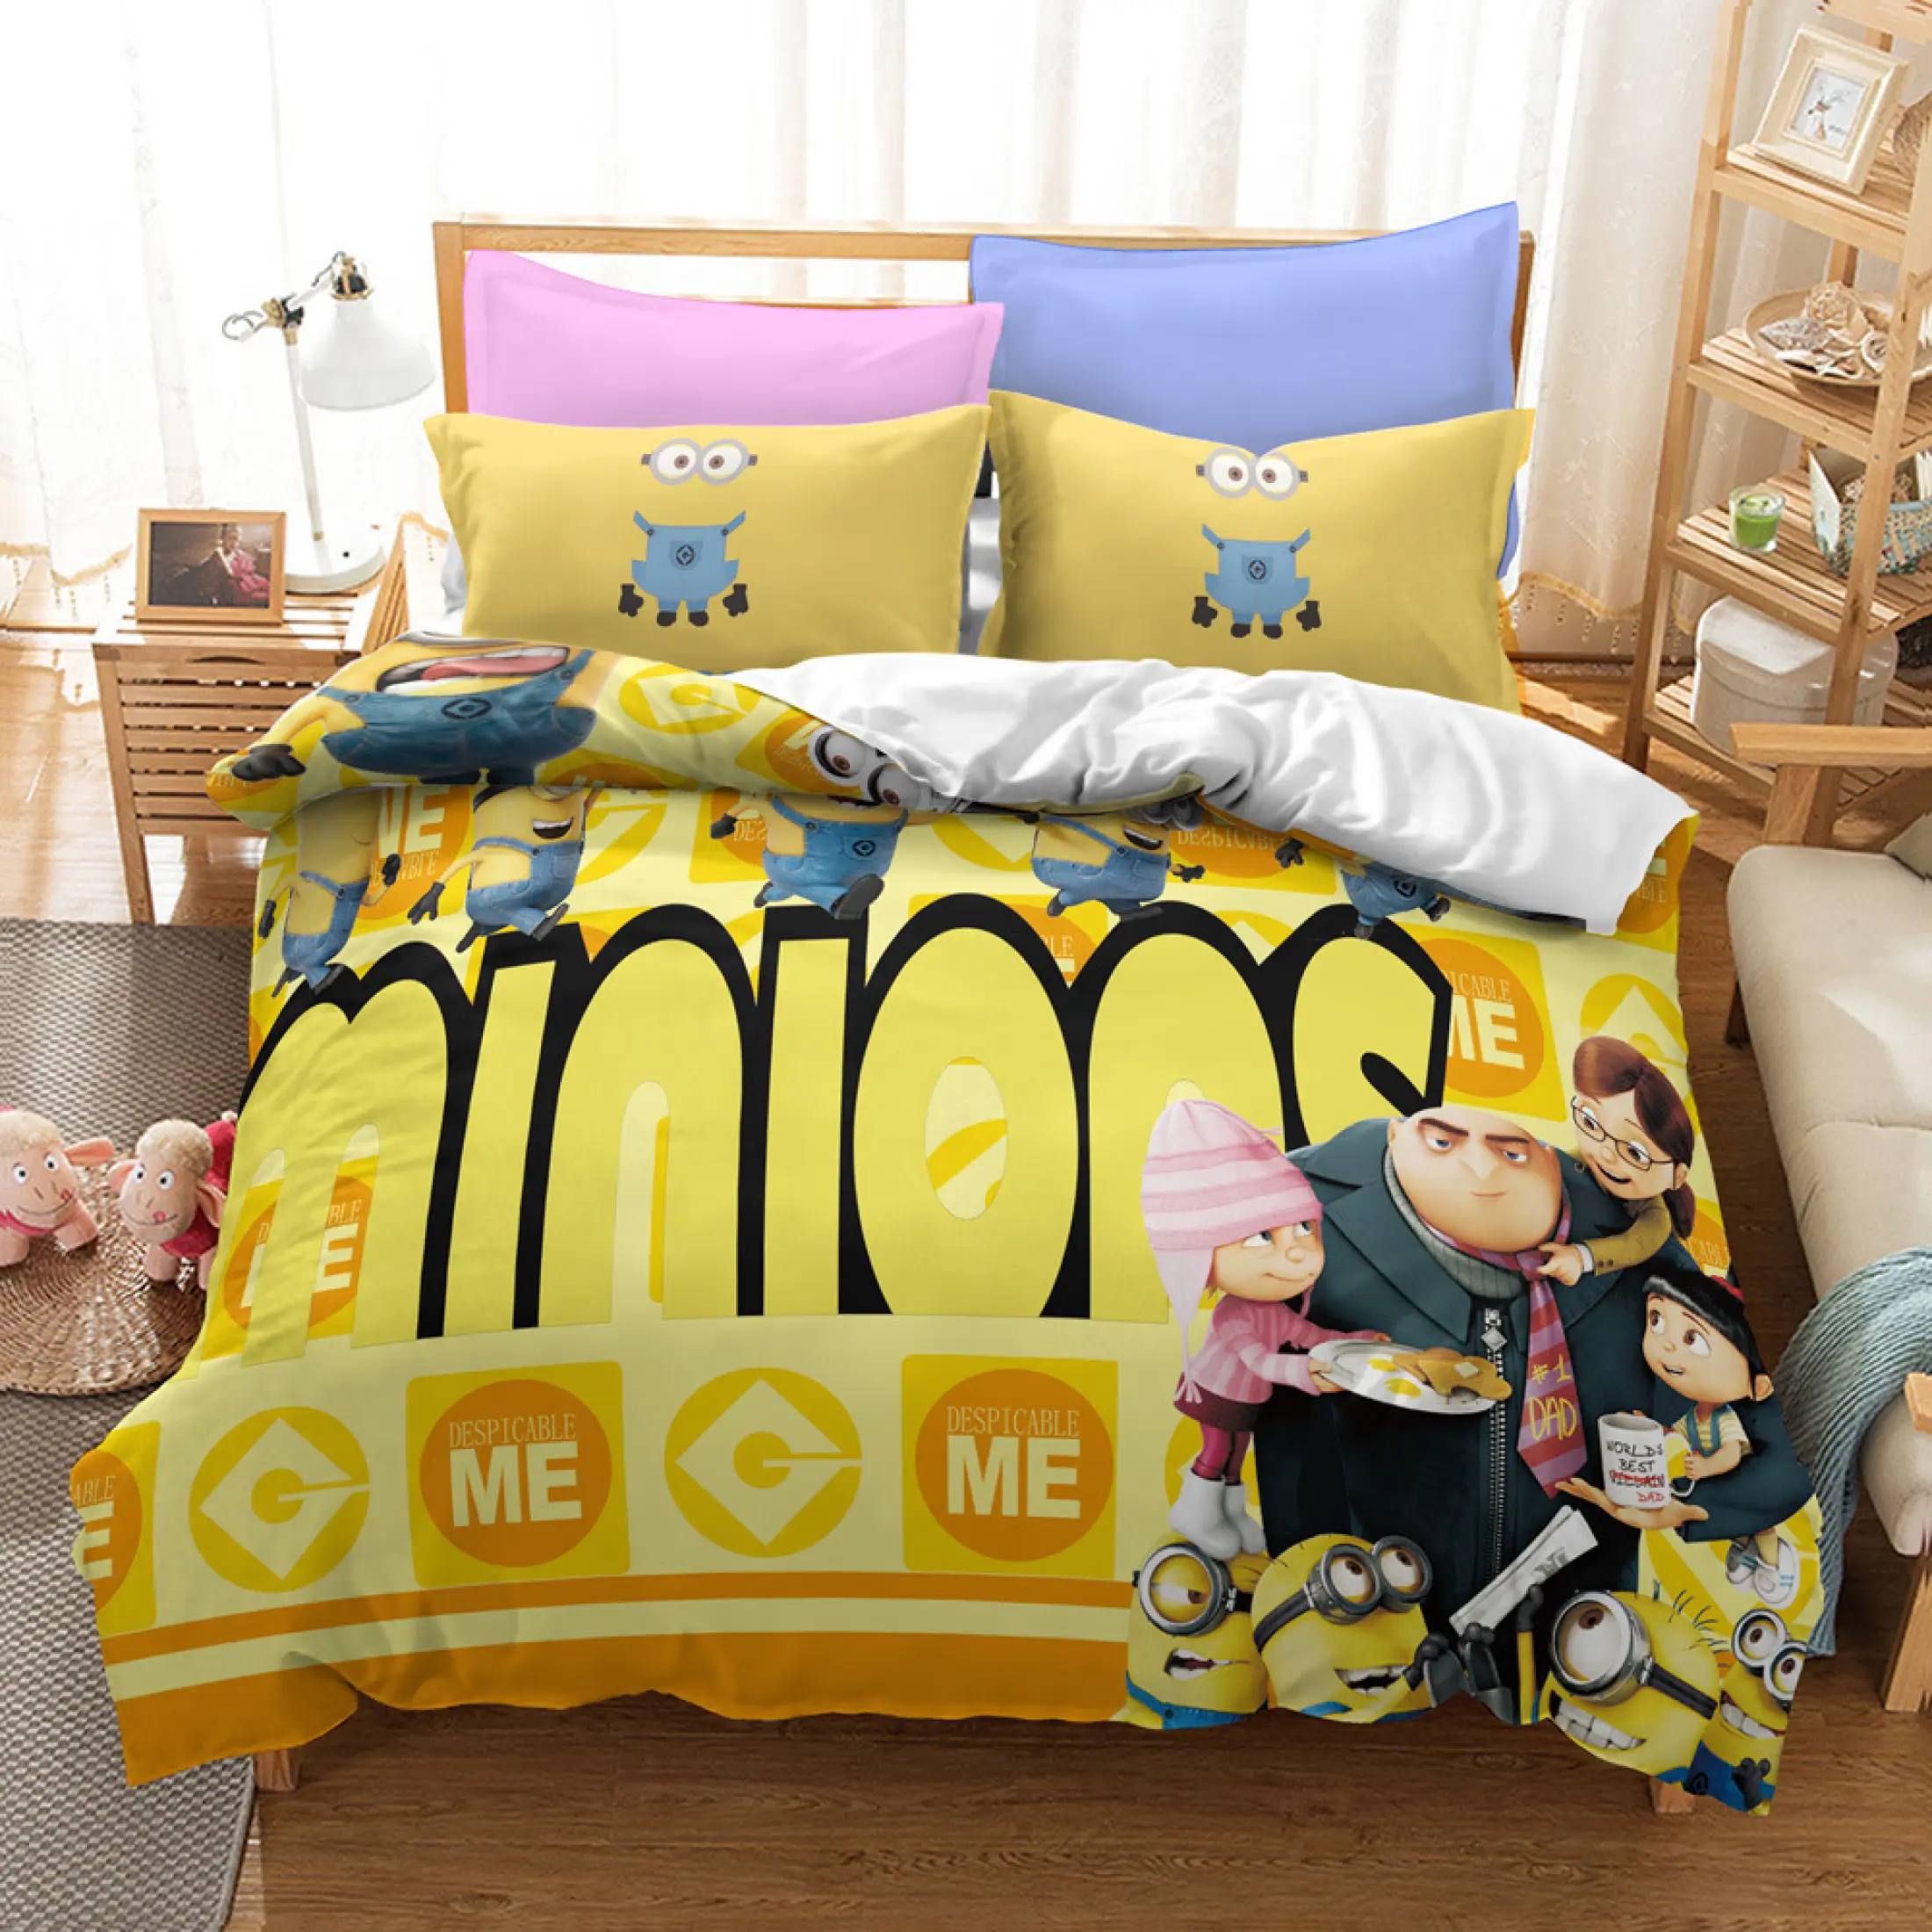 Gifts Bedclothes Bed Linens Bedding Set, King Size Despicable Me Bedding